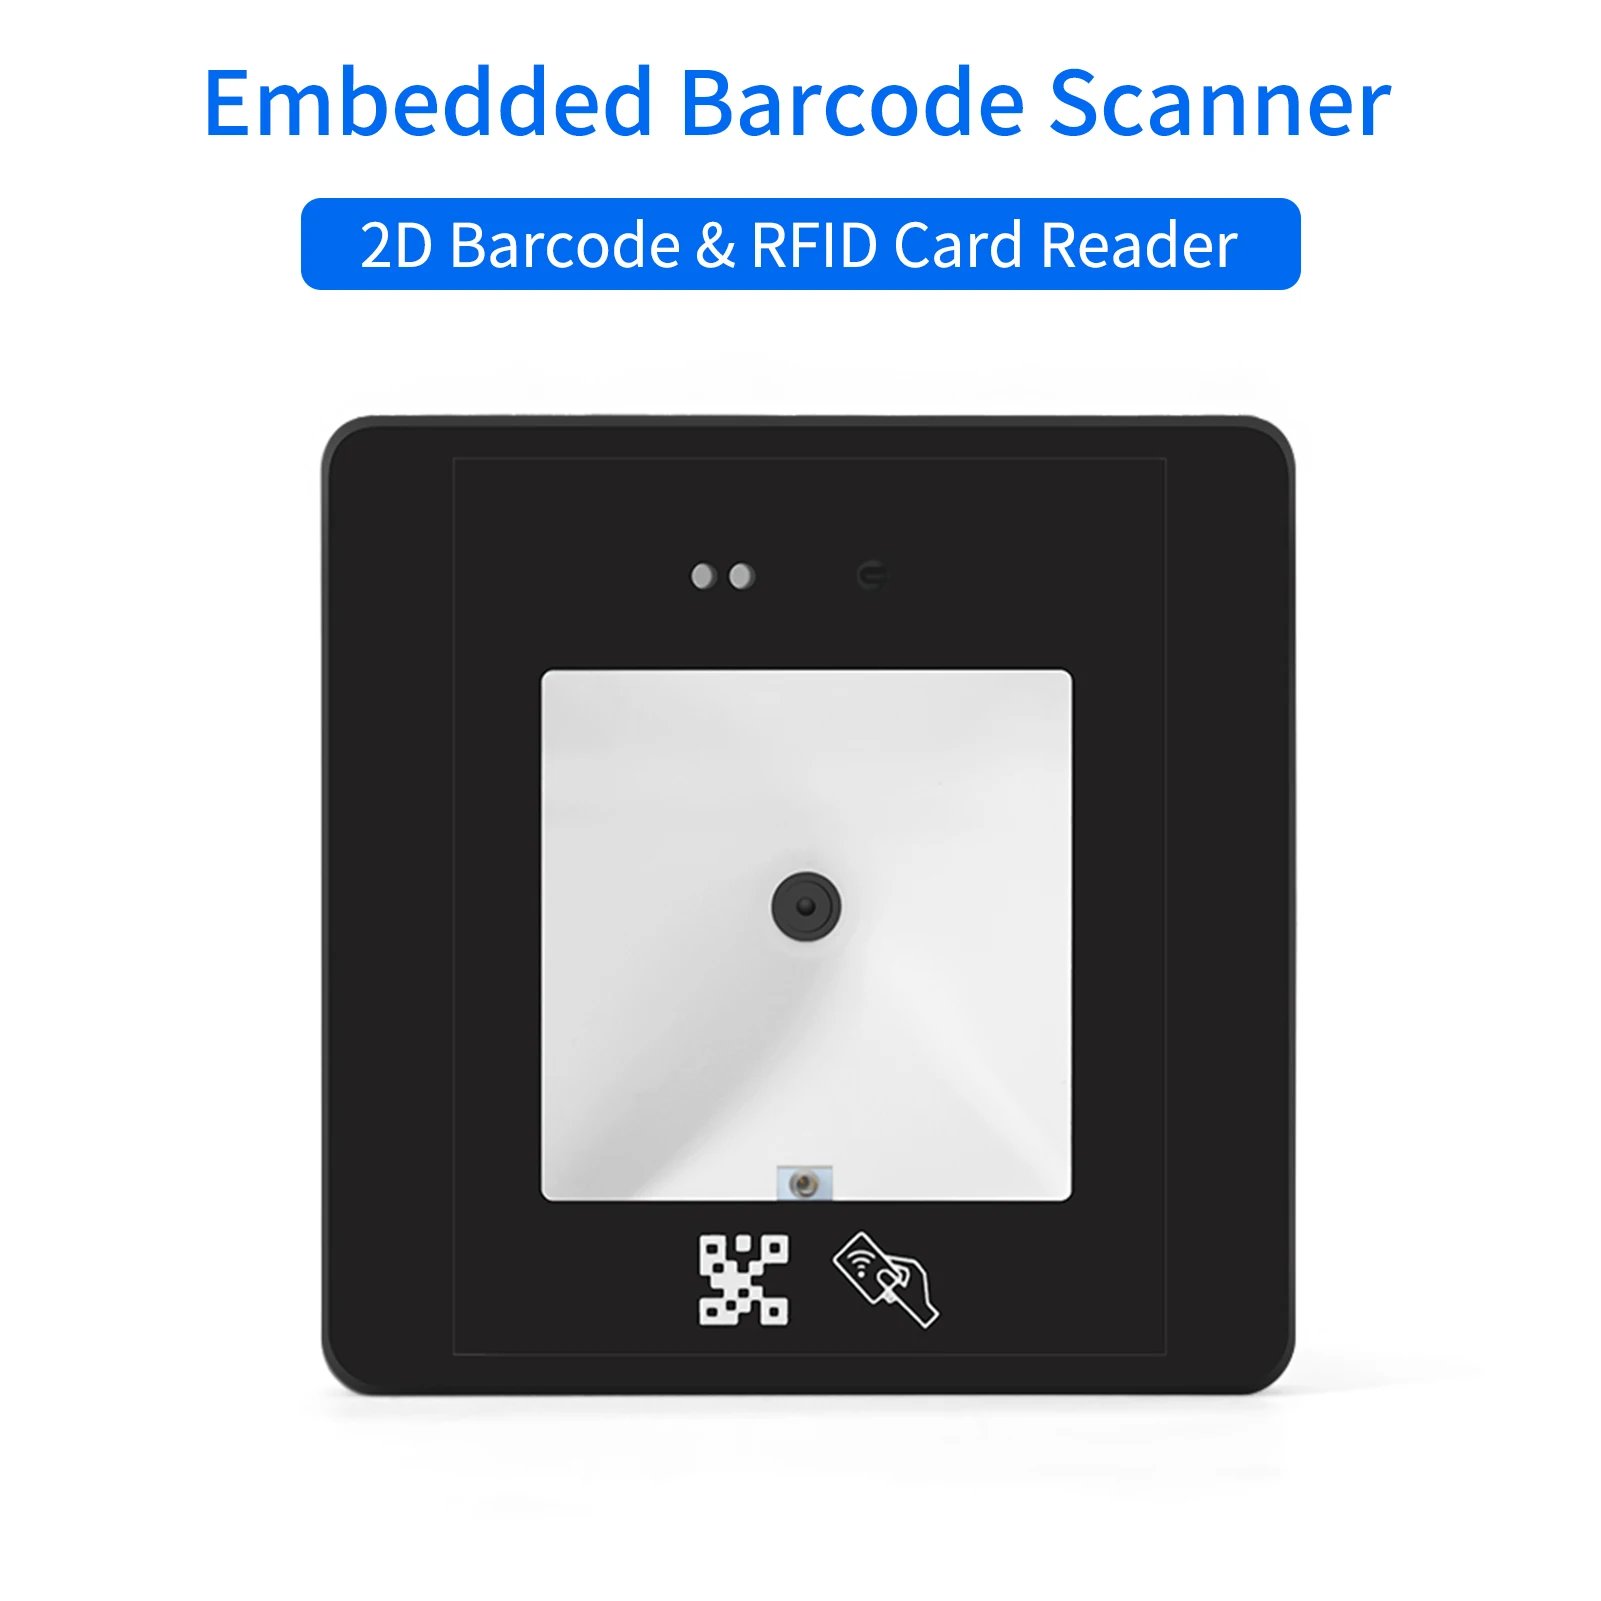 Embedded Barcode Scanner Wired Scanning Module RFID Card Reader High Speed Barcode USB for 1D 2D QR Code for Mobile Payment